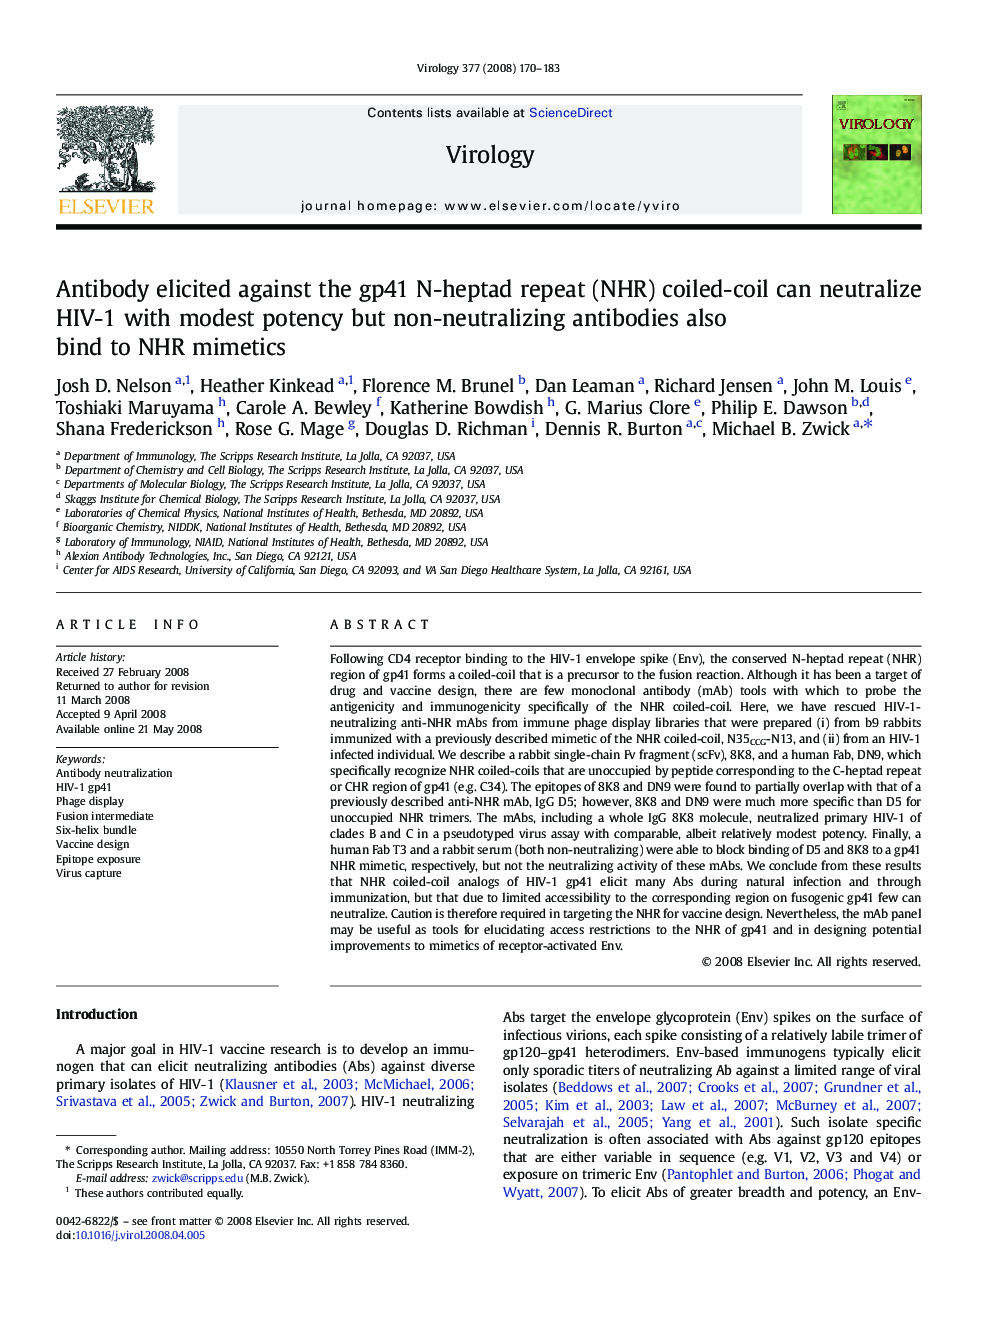 Antibody elicited against the gp41 N-heptad repeat (NHR) coiled-coil can neutralize HIV-1 with modest potency but non-neutralizing antibodies also bind to NHR mimetics